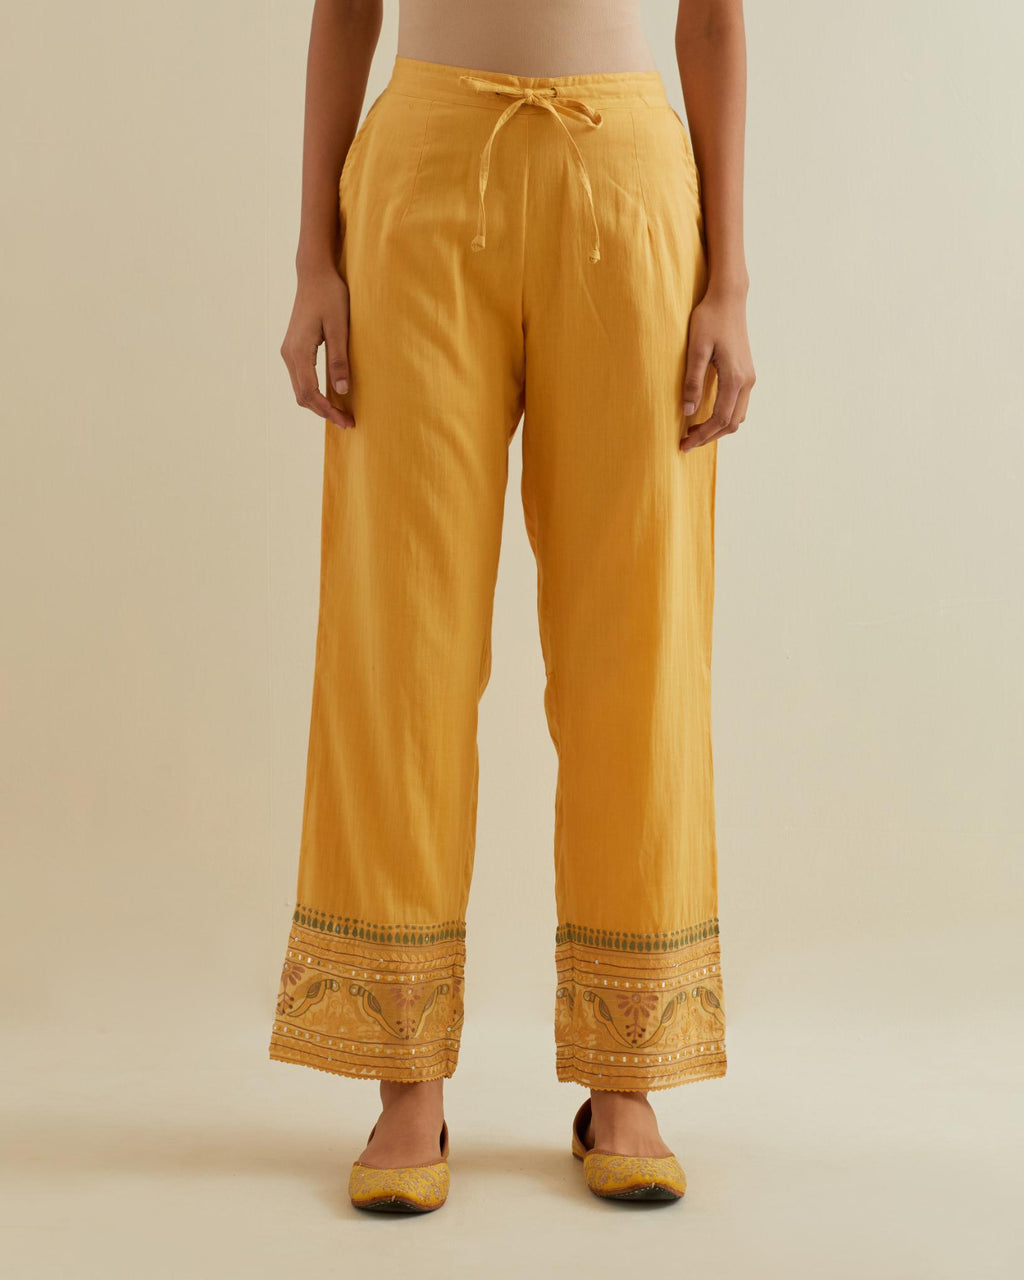 Yellow straight pants with all over multi color embroidery detailed with sequins.